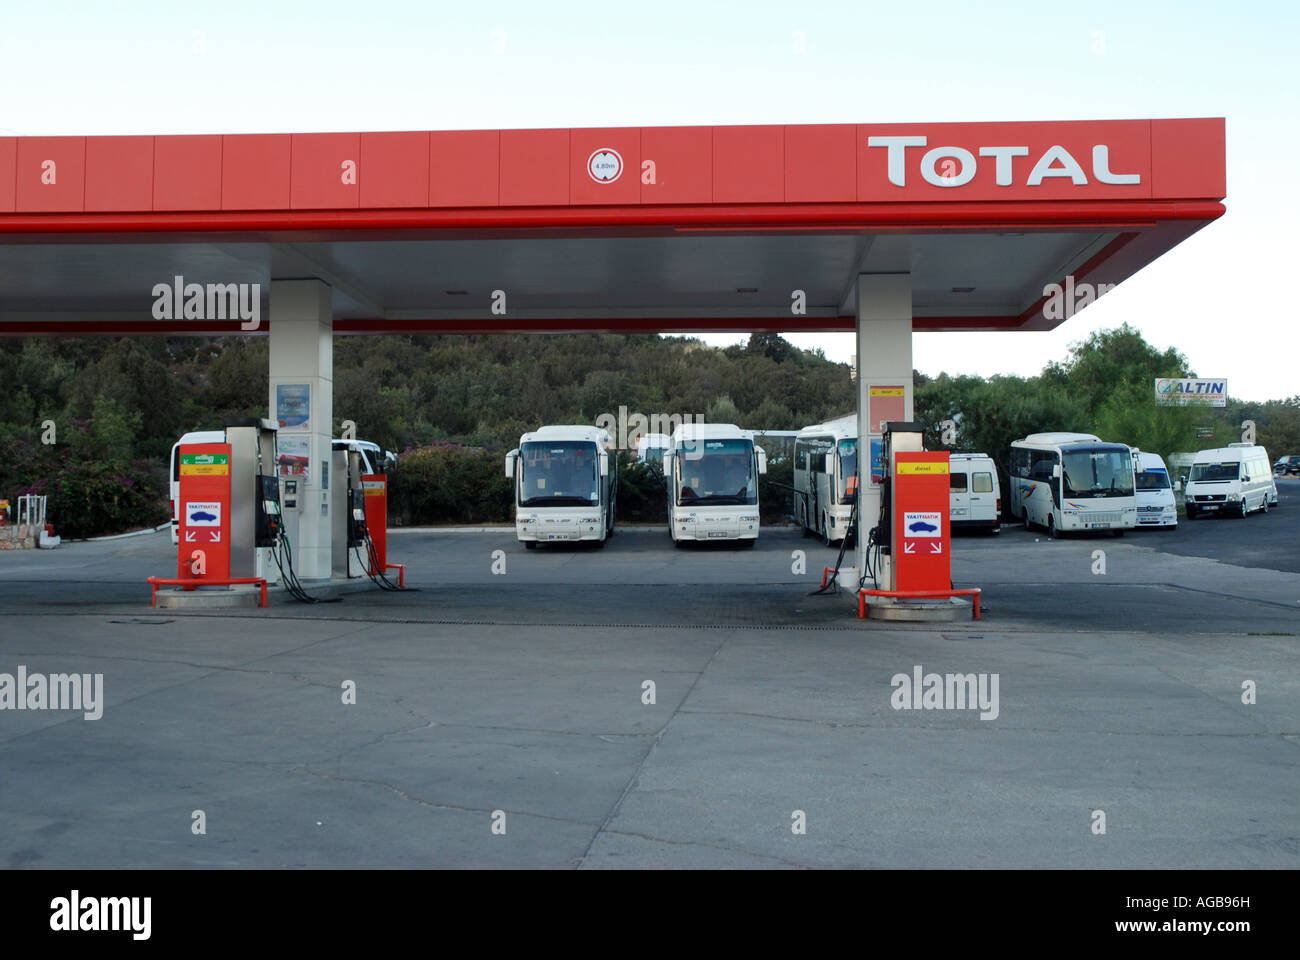 Total gas station in Turkey Stock Photo